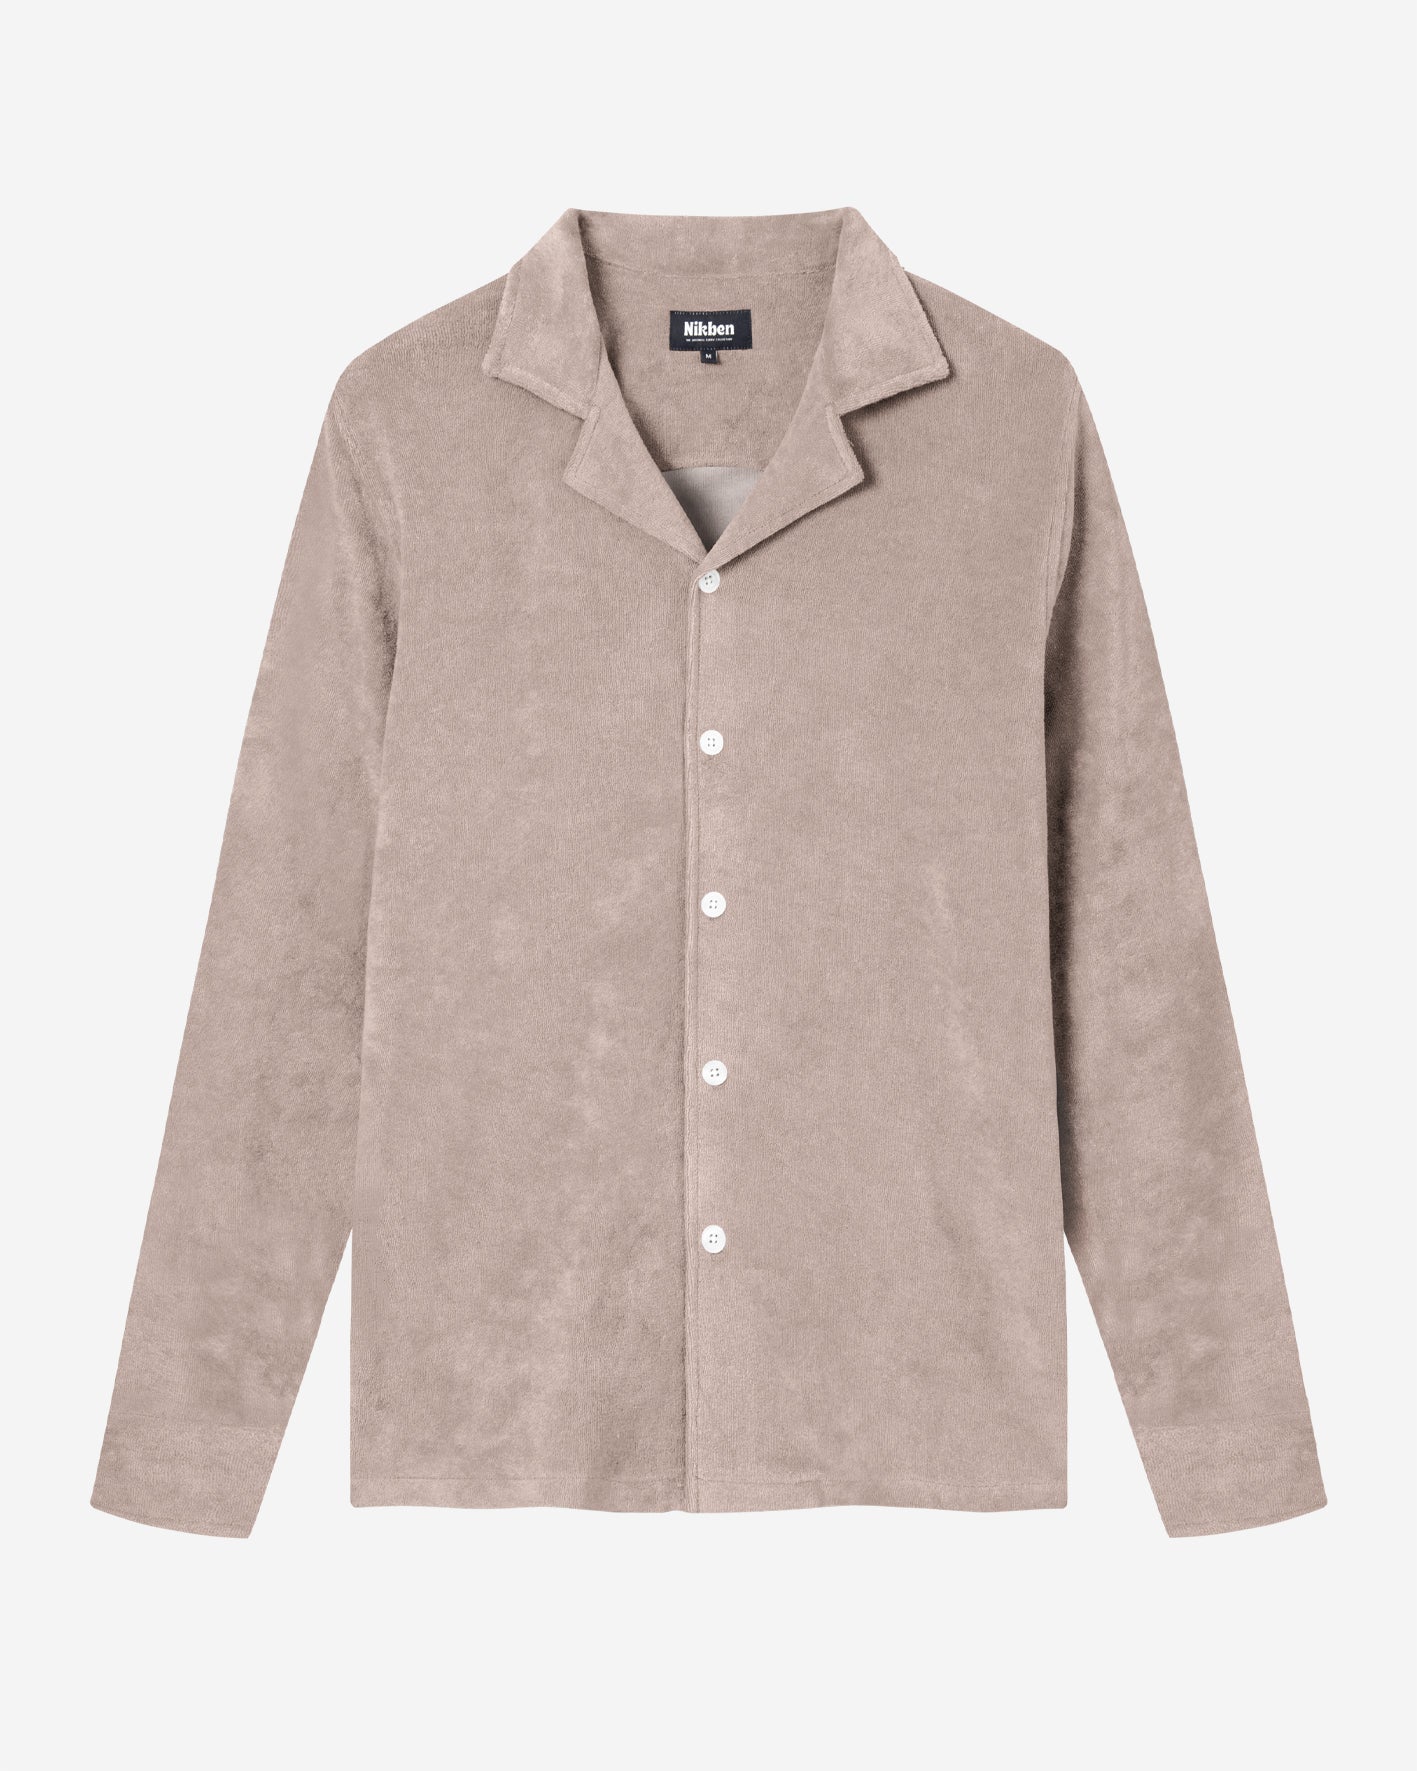 Long sleeve shirt with white buttons